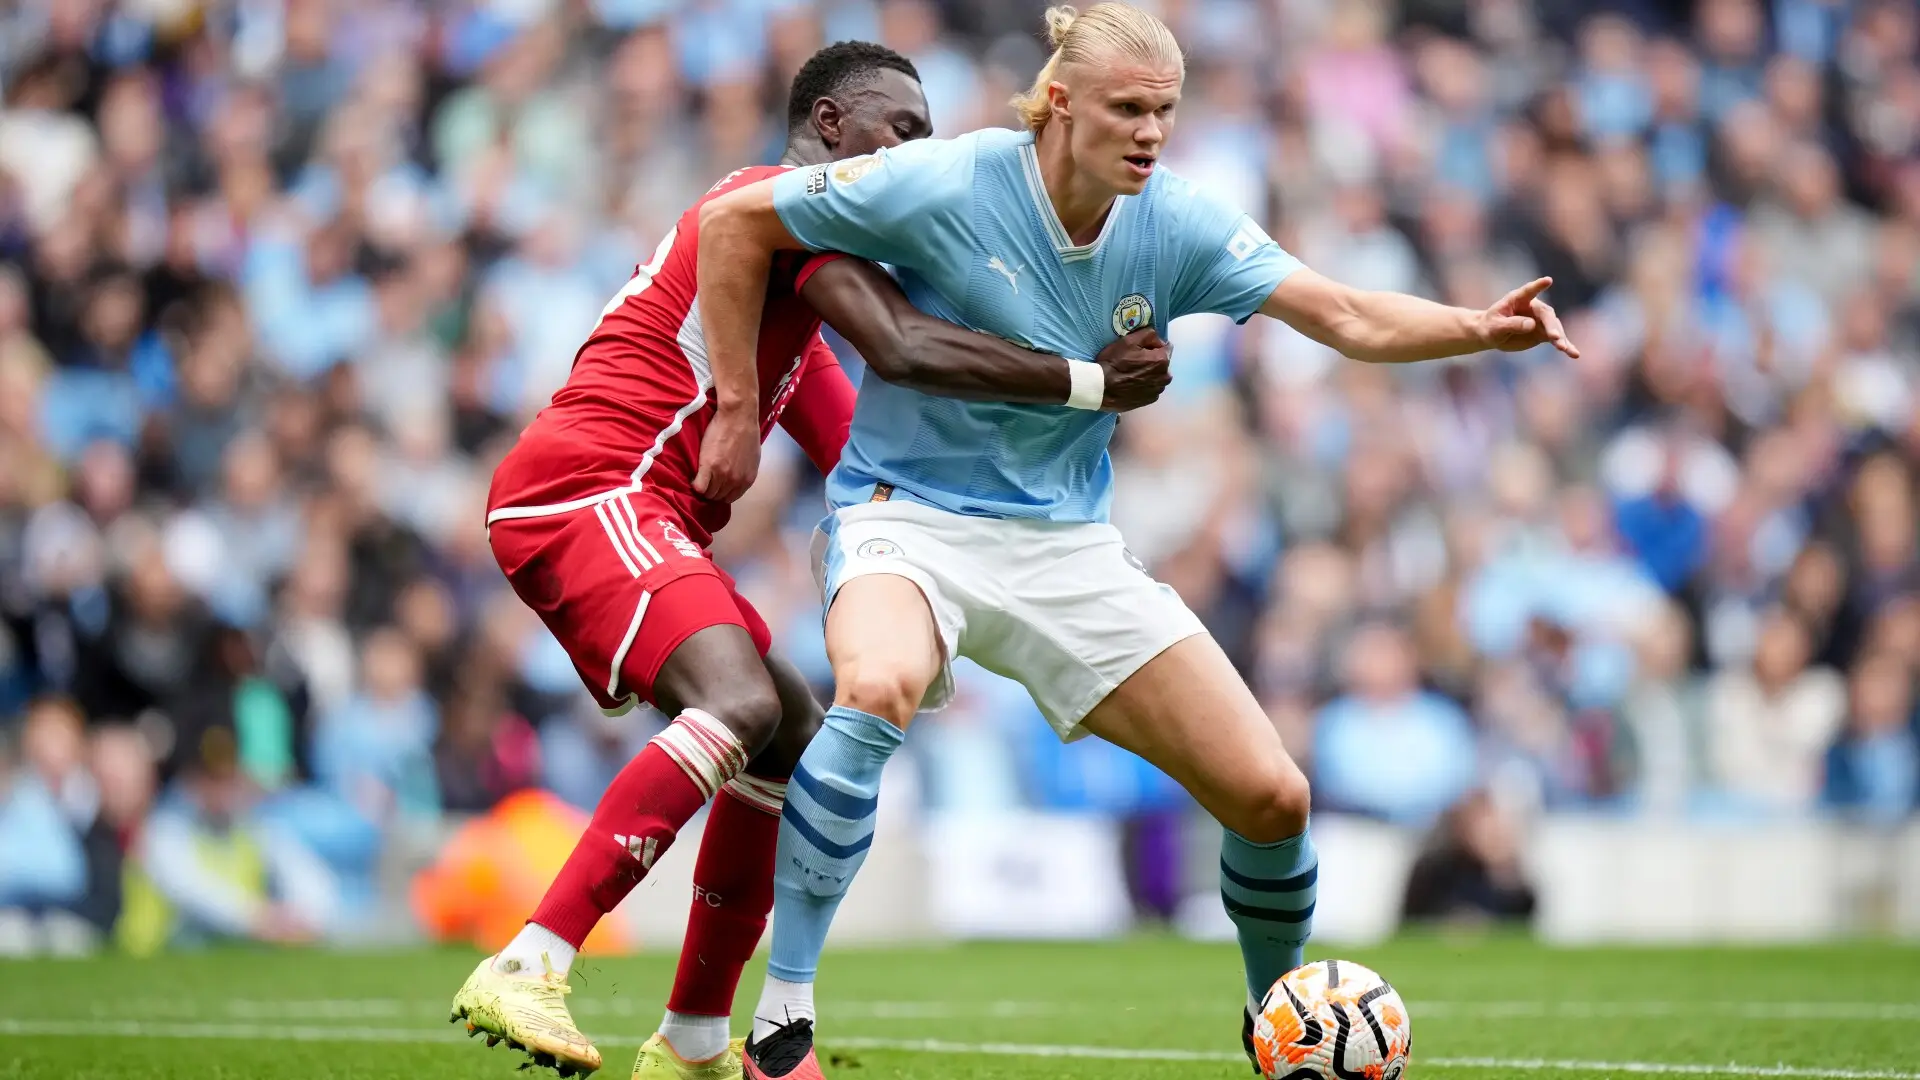 Nottingham Forest vs Manchester City: Predictions, odds and best tips